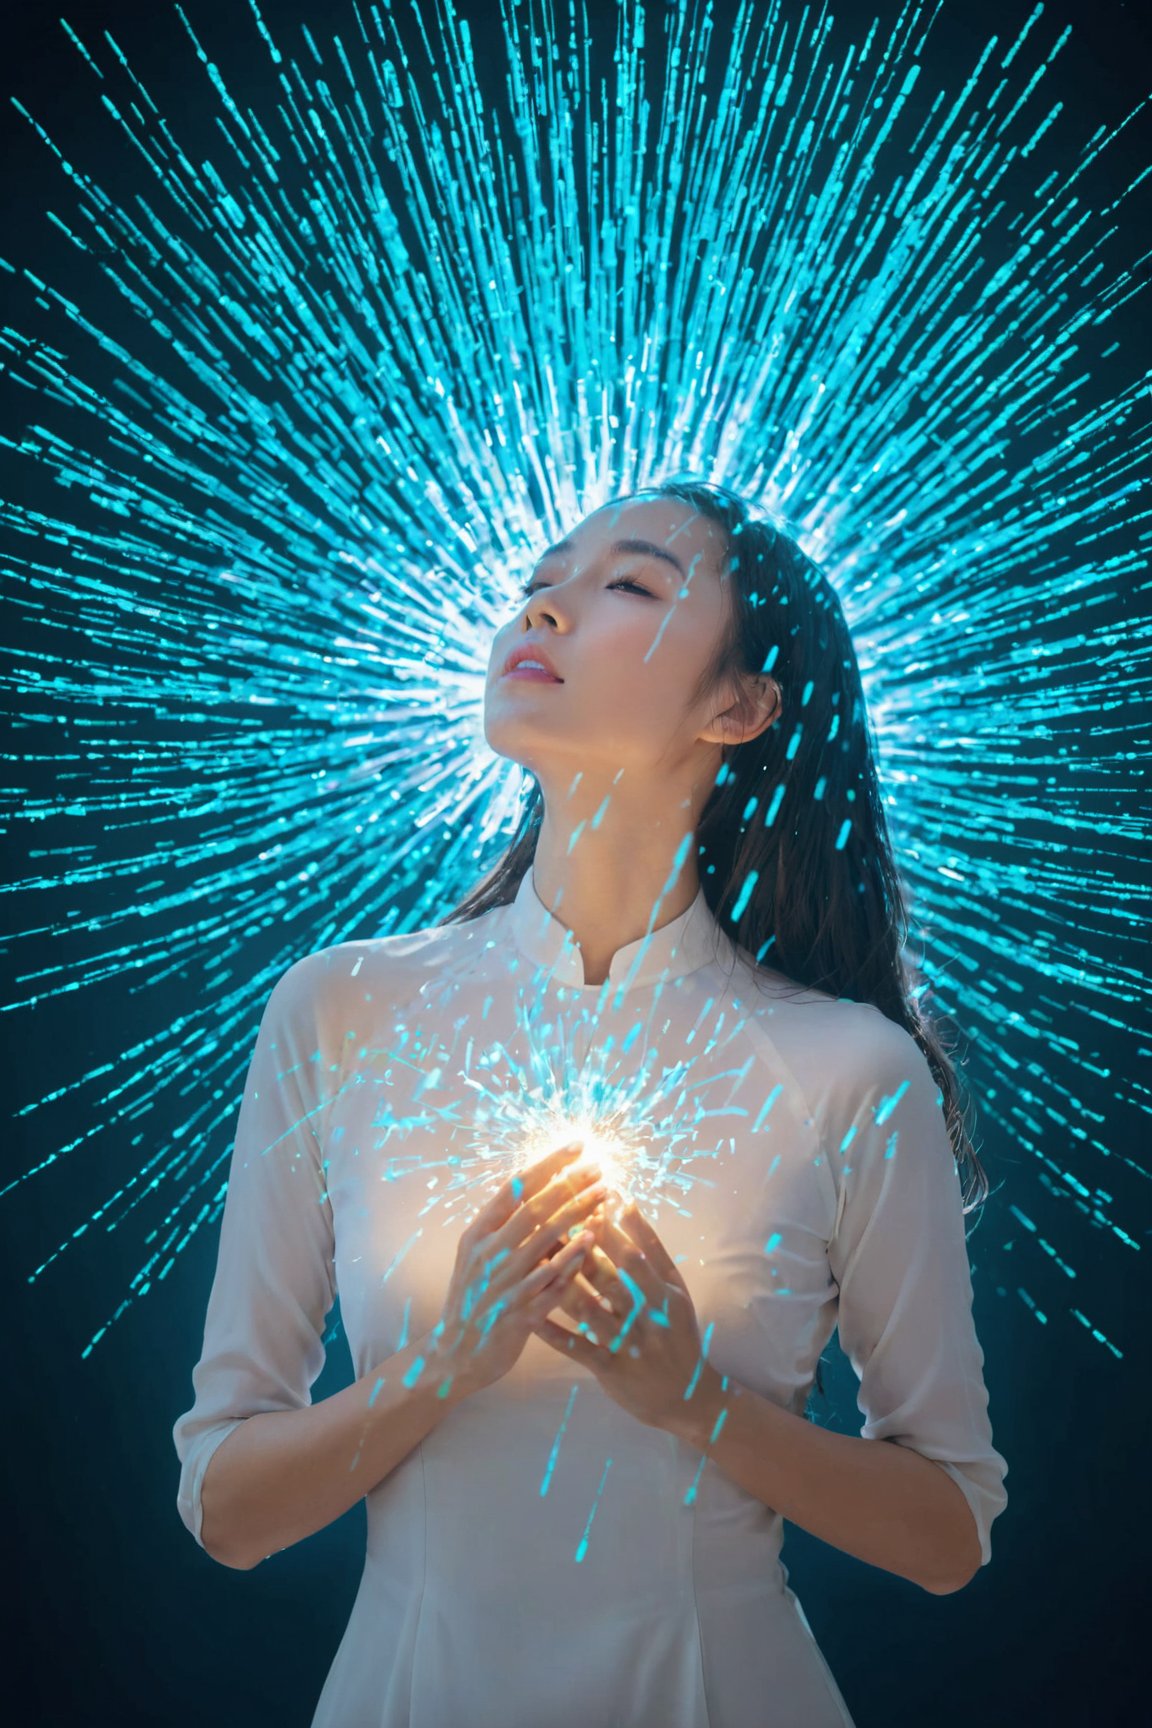 Woman glowing in fine light particles,  brilliant sparks and showers,  ethereal,  luminous,  dynamic composition,  rich textures,  blue,  turquoise,  bright white,  centered,  subject in the center, aodaixl,<lora:EMS-265525-EMS:0.700000>